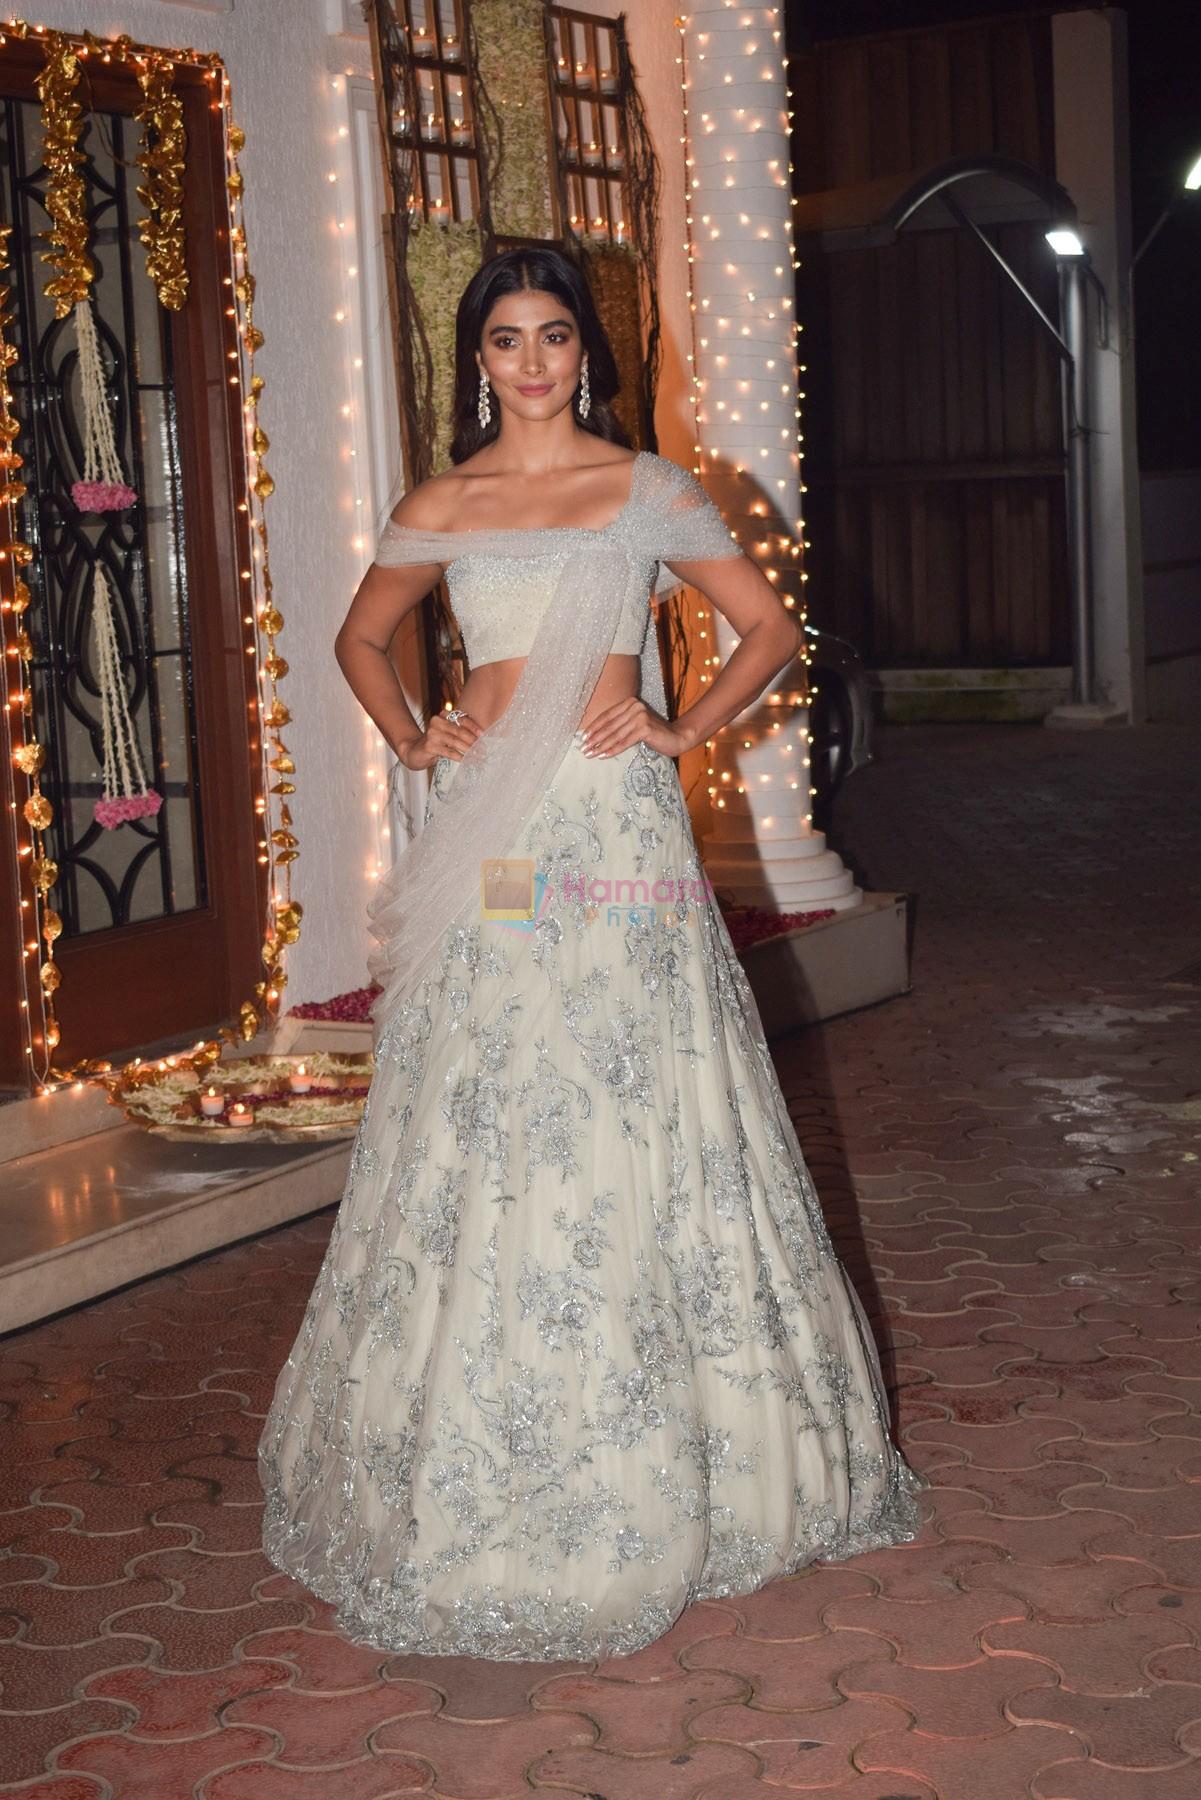 Pooja Hegde at Shilpa Shetty's Diwali party on 20th Oct 2017